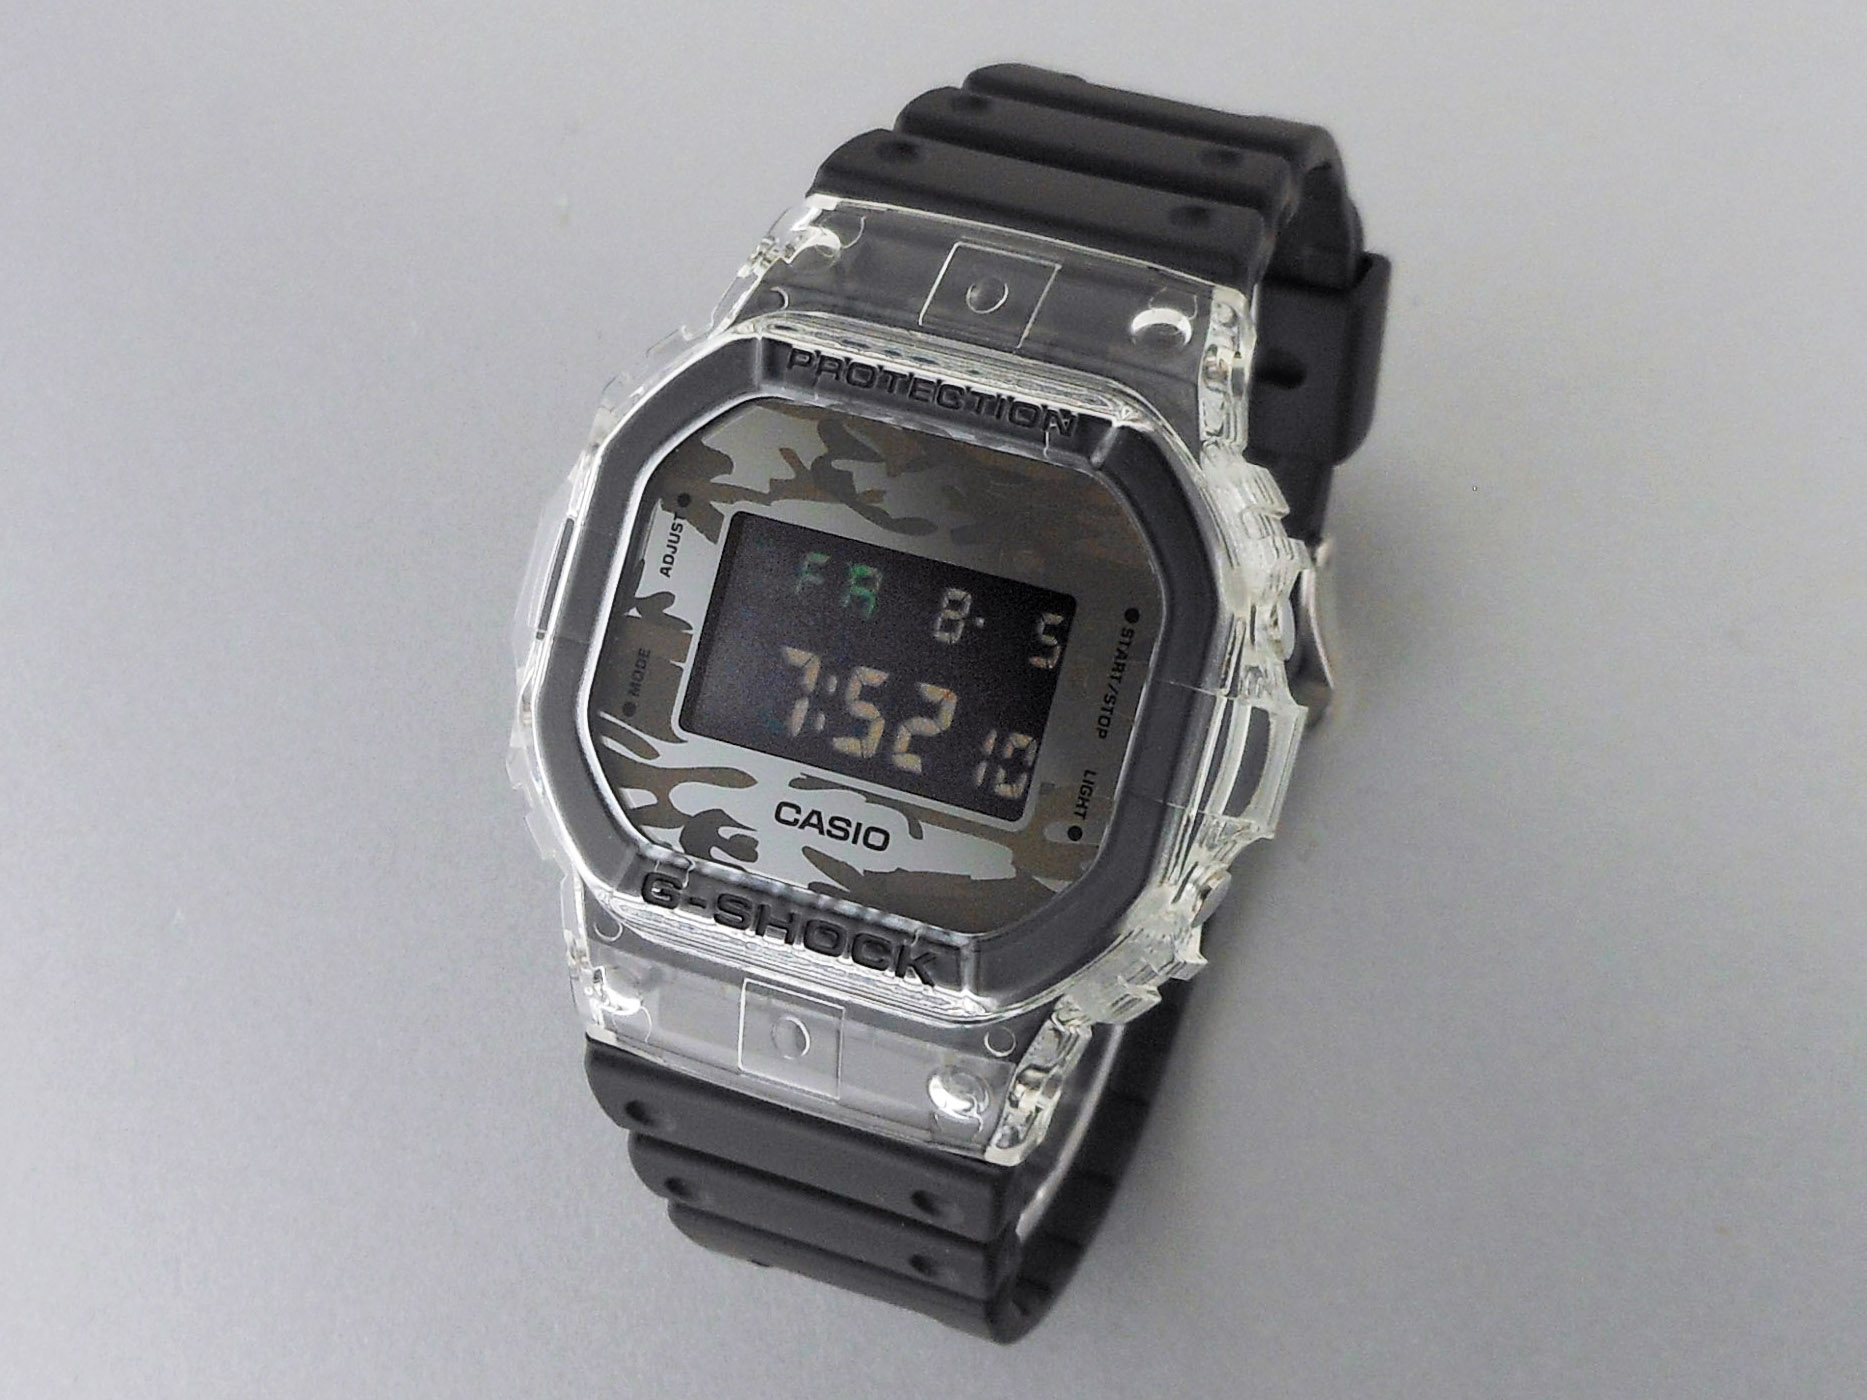 G-SHOCK DW-5600SK-1JF クリア　グレー　ツートン